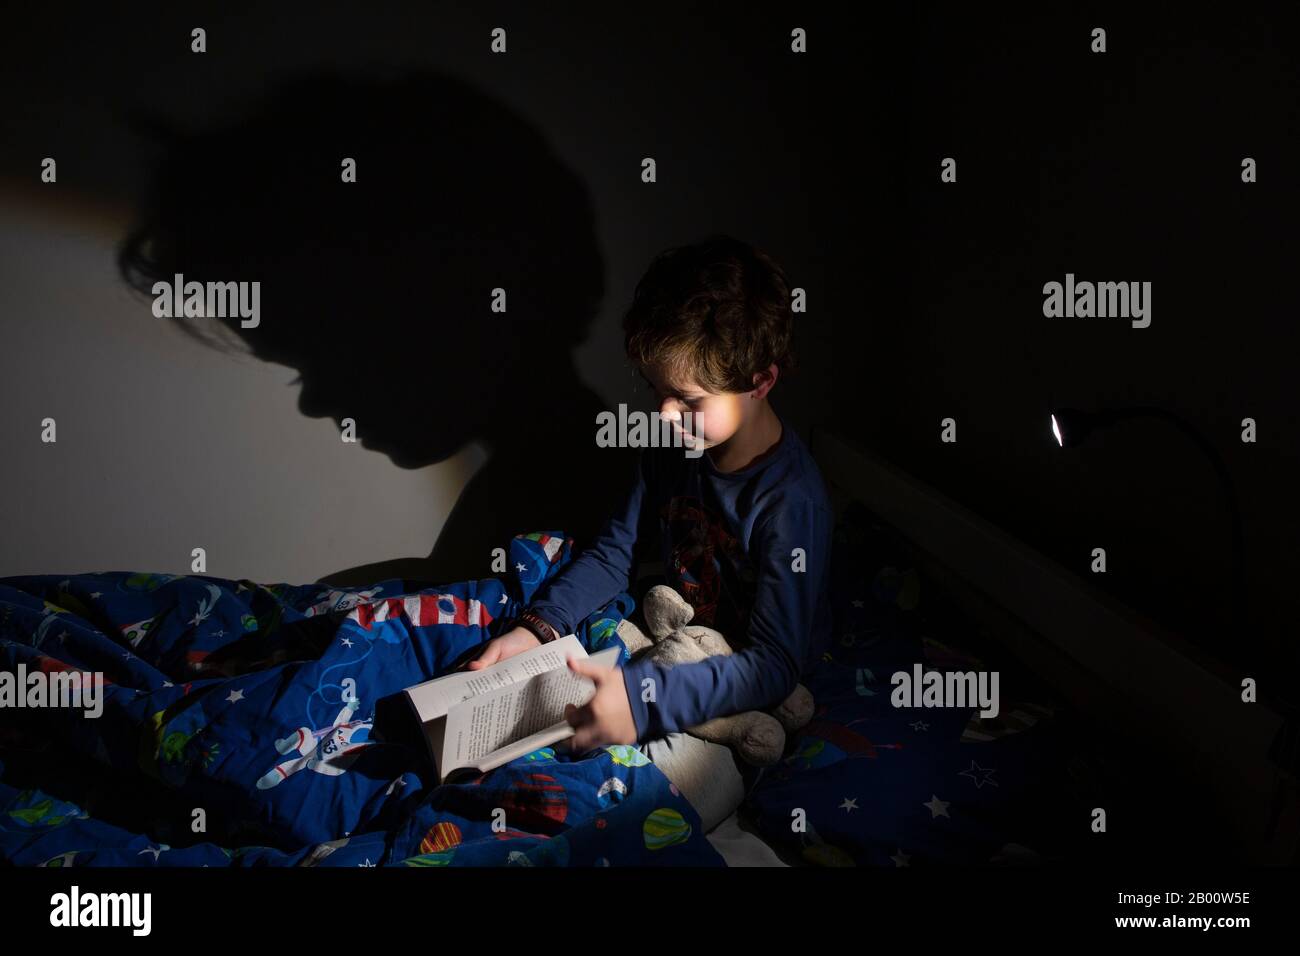 6 year old boy reading an Enid Blyton book at night time in his bedroom, England, United Kingdom Stock Photo